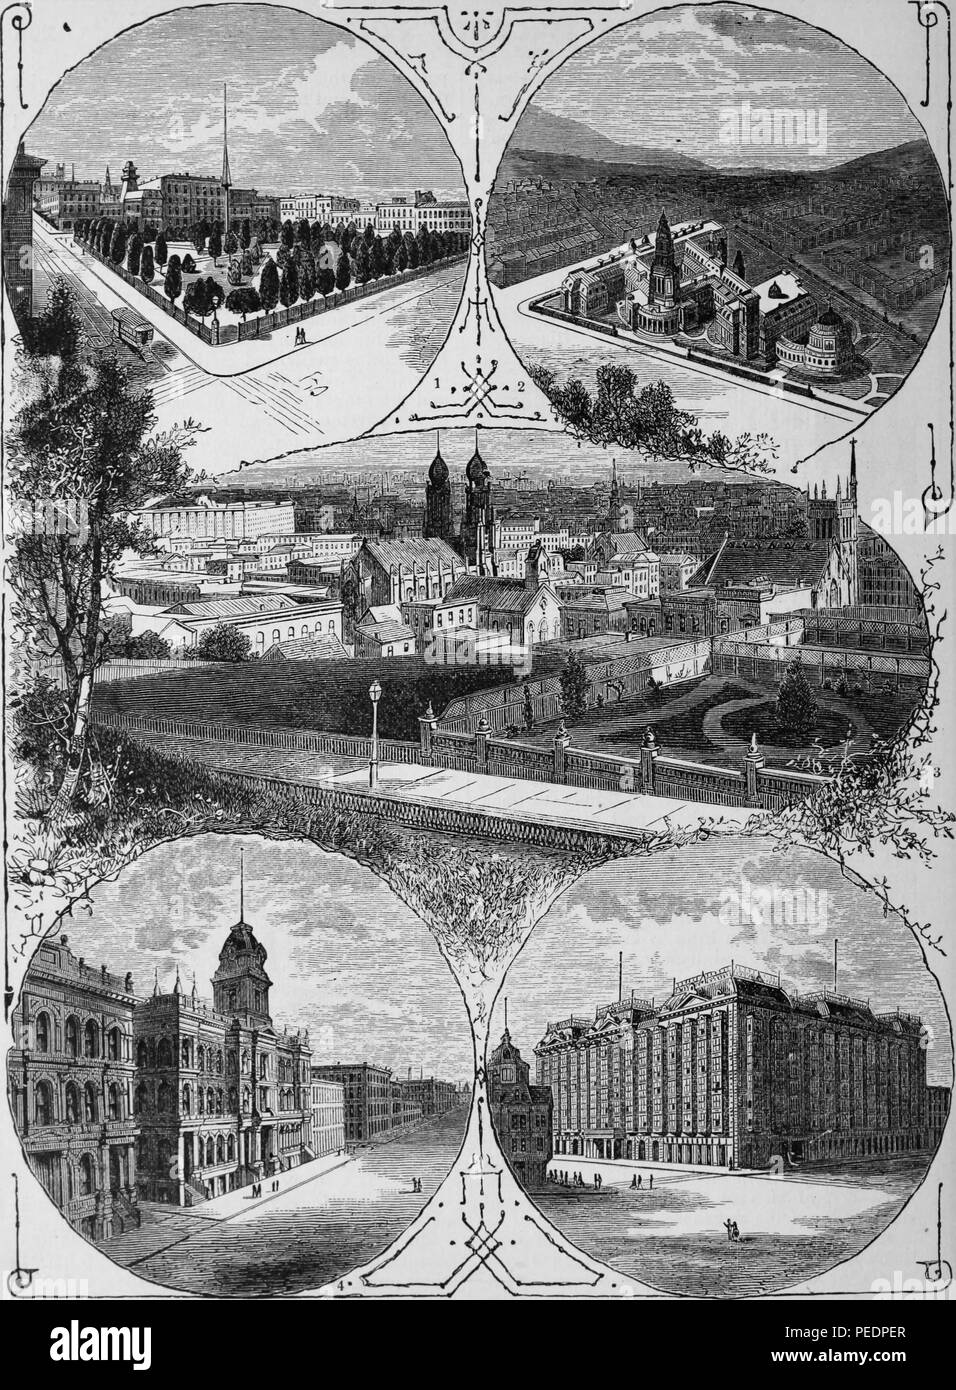 Black and white print depicting five views of late, 19th-century San Francisco, including (clockwise from top left) the city park, new City Hall, the Merchant's Exchange, buildings on Market Street, and (center) a view of the city looking toward the bay, published in 'The Pacific Tourist: Adams and Bishop's illustrated trans-continental guide of travel, from the Atlantic to the Pacific Ocean: a complete traveler's guide of the Union and Central Pacific railroads', 1881. Courtesy Internet Archive. () Stock Photo